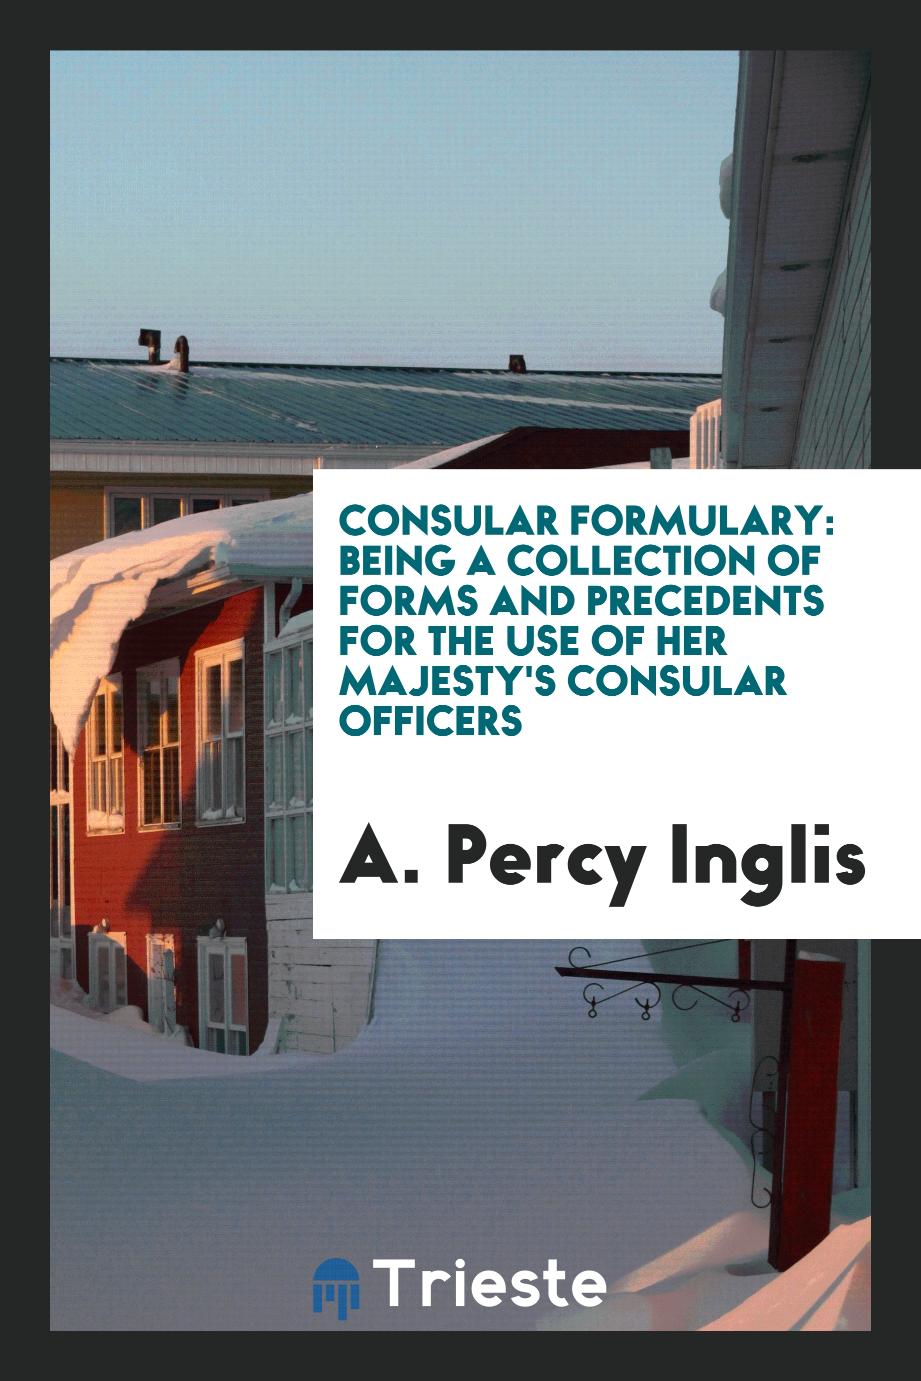 A. Percy Inglis - Consular Formulary: Being a Collection of Forms and Precedents for the Use of Her Majesty's Consular Officers